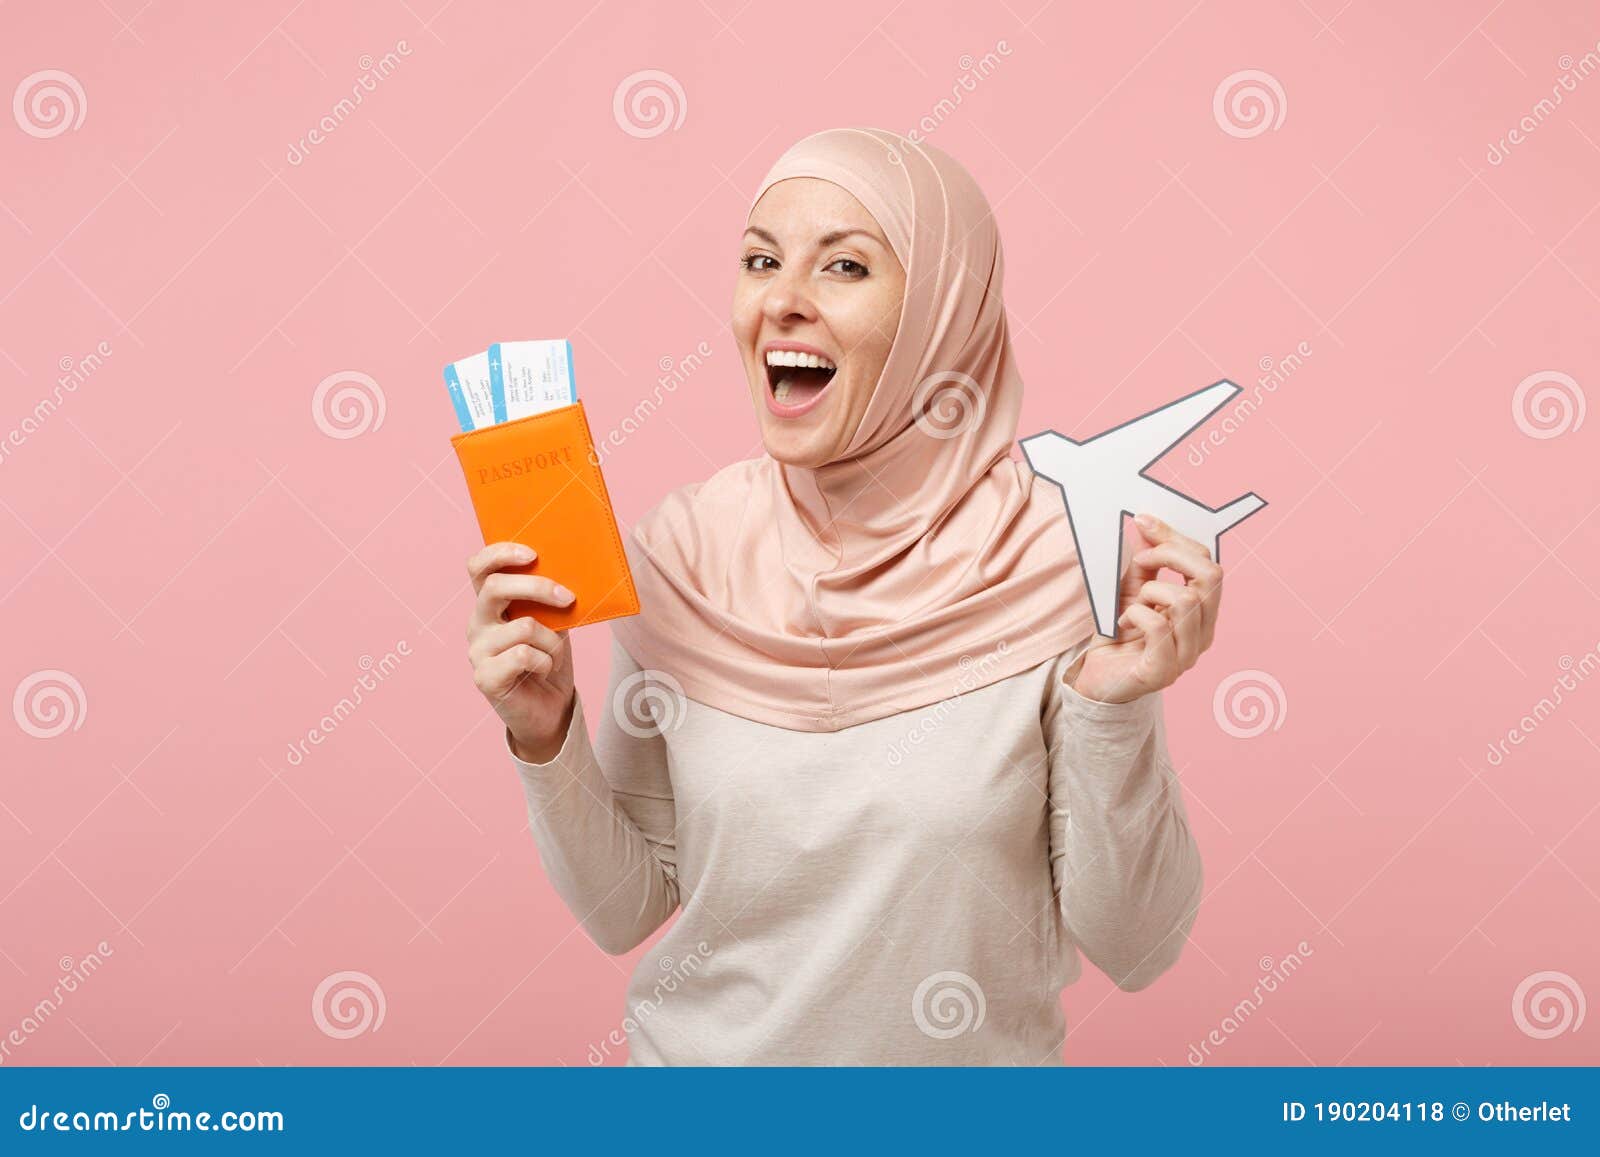 Download Funny Arabian Muslim Woman In Hijab Light Clothes Posing Isolated On Pink Background. People ...